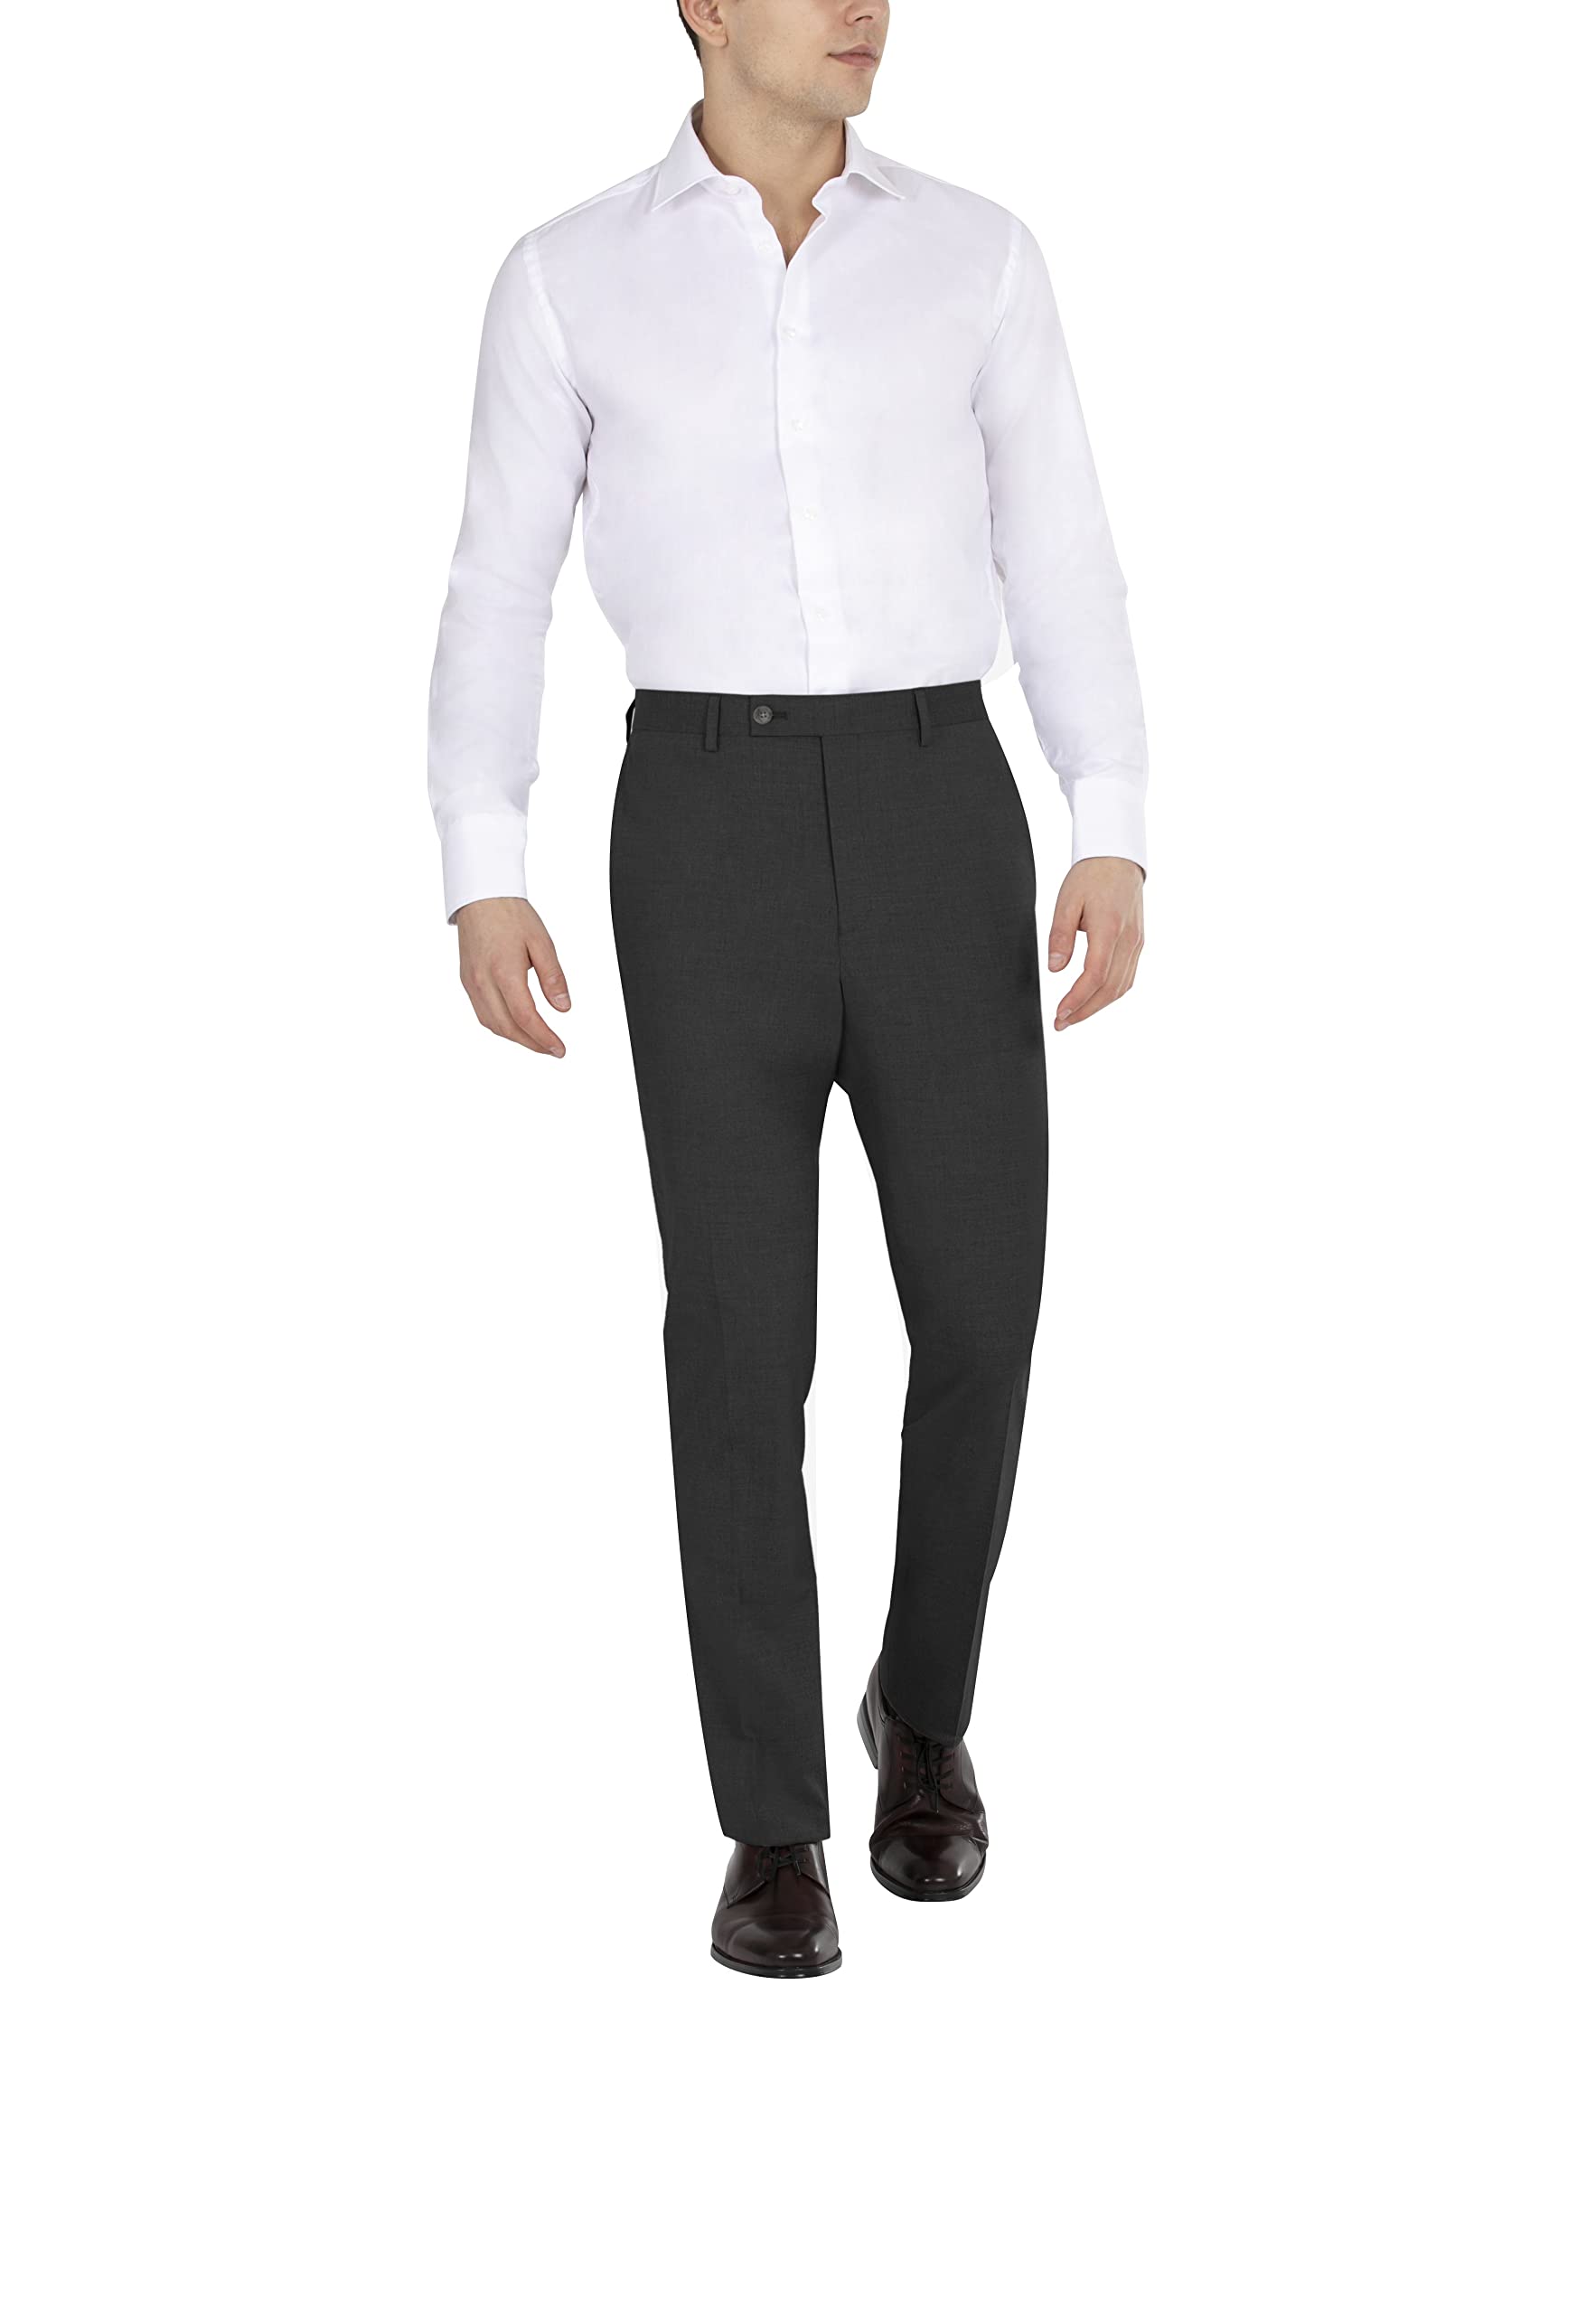 DKNY Men's Modern Fit High Performance Suit Separates